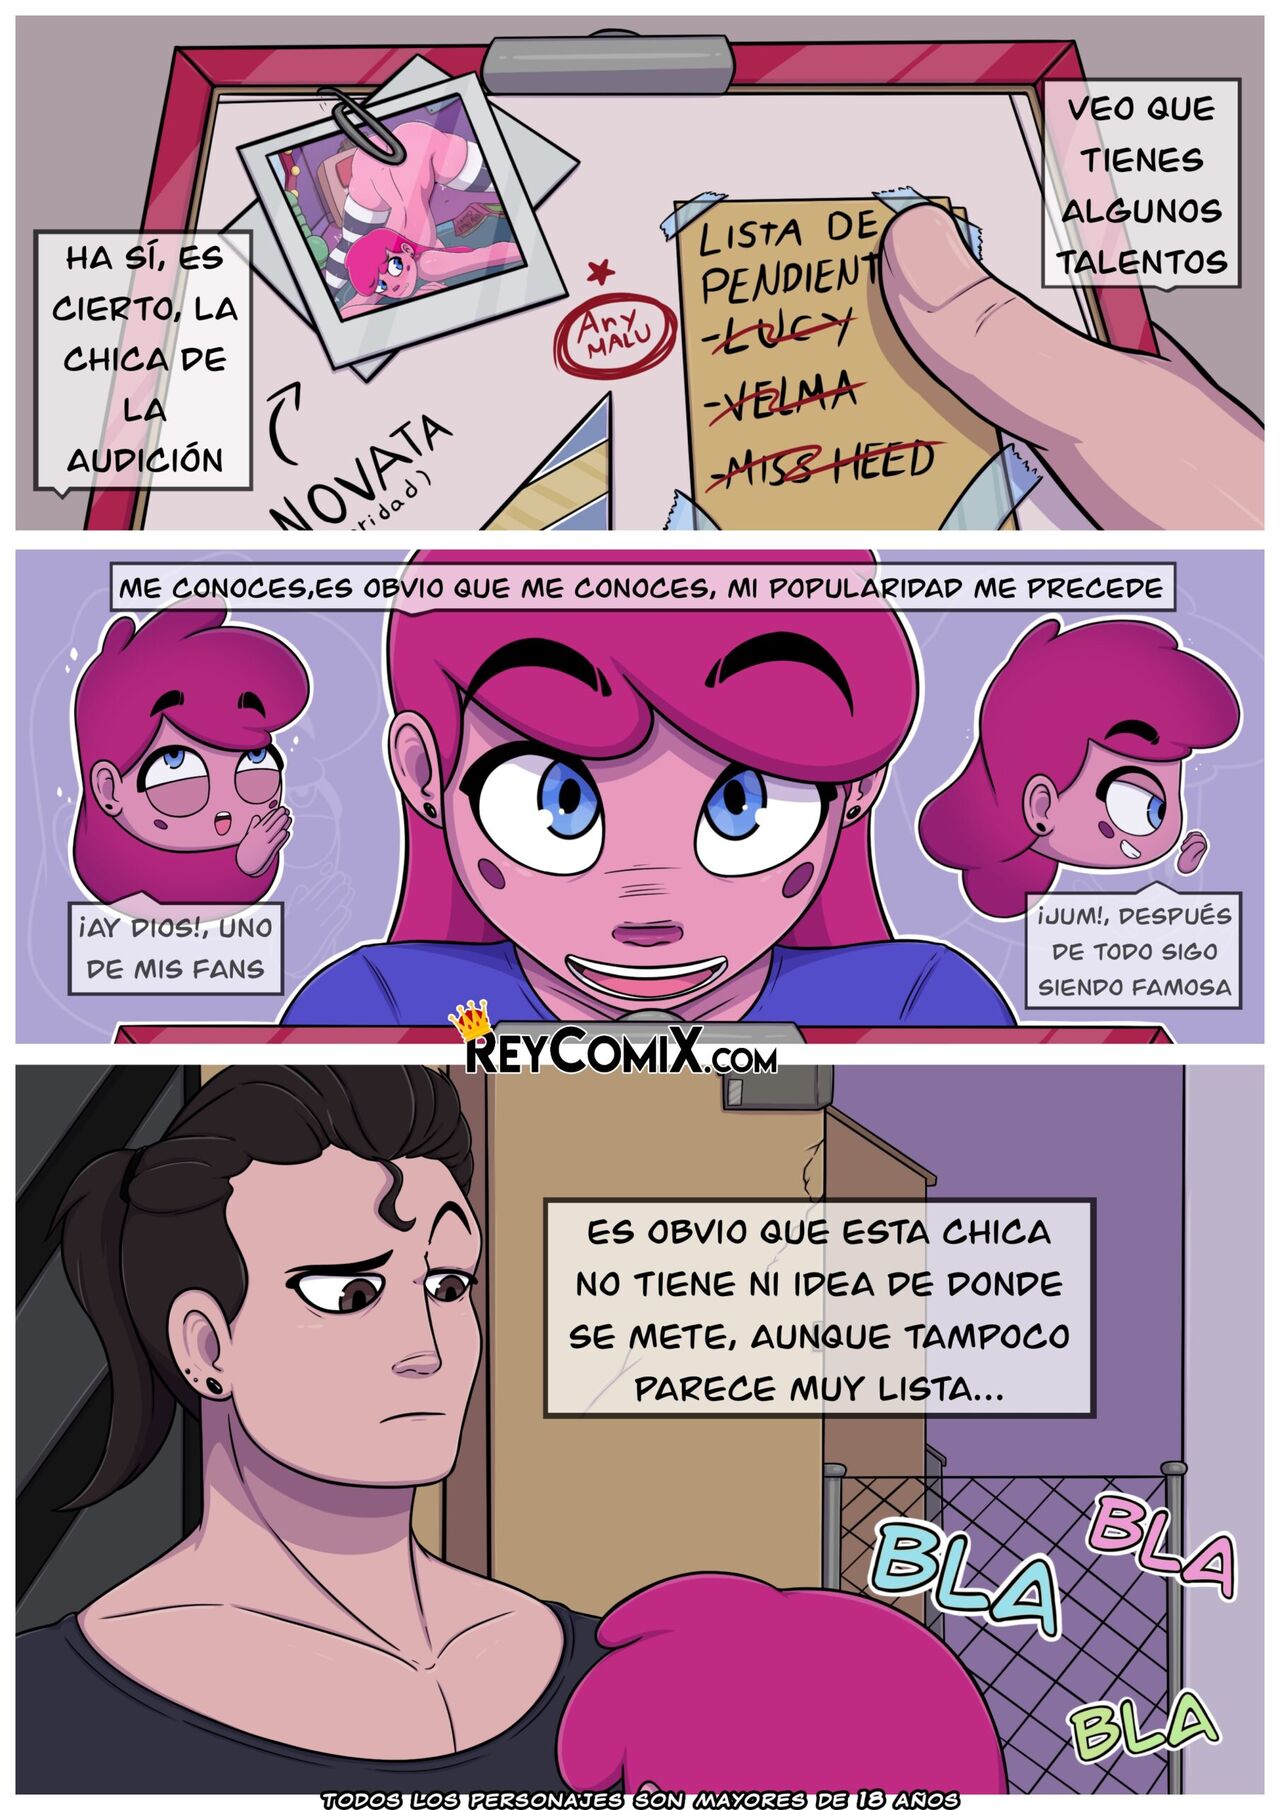 Any Malu – The Pink Bitches xxx – Primer Acto [ReyComiX]